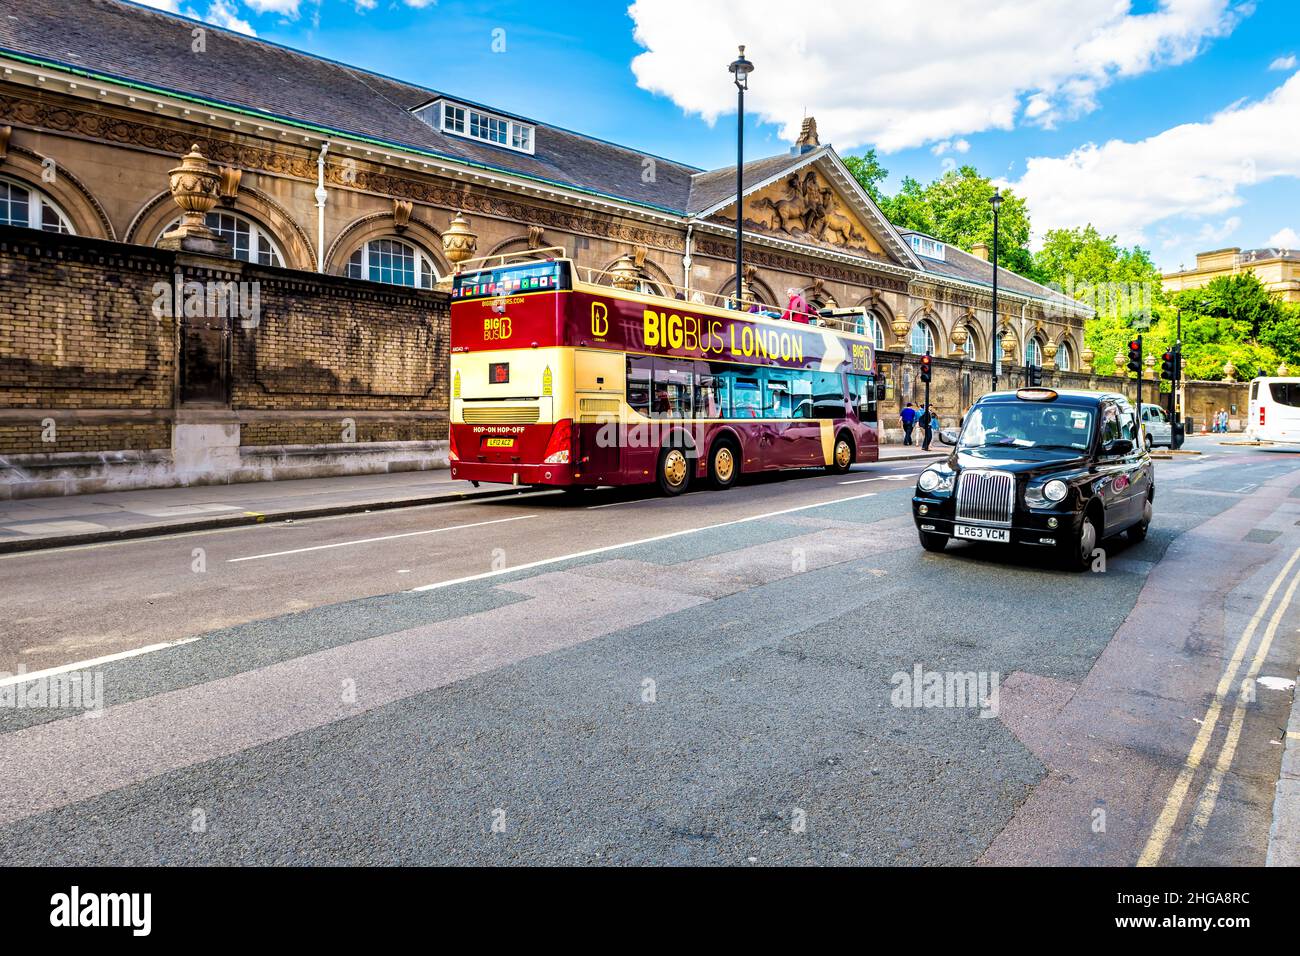 London, UK - June 21, 2018: Cars and BigBus big tour bus double decker on road by Buckingham palace with black taxi cab and Royal Mews building Stock Photo